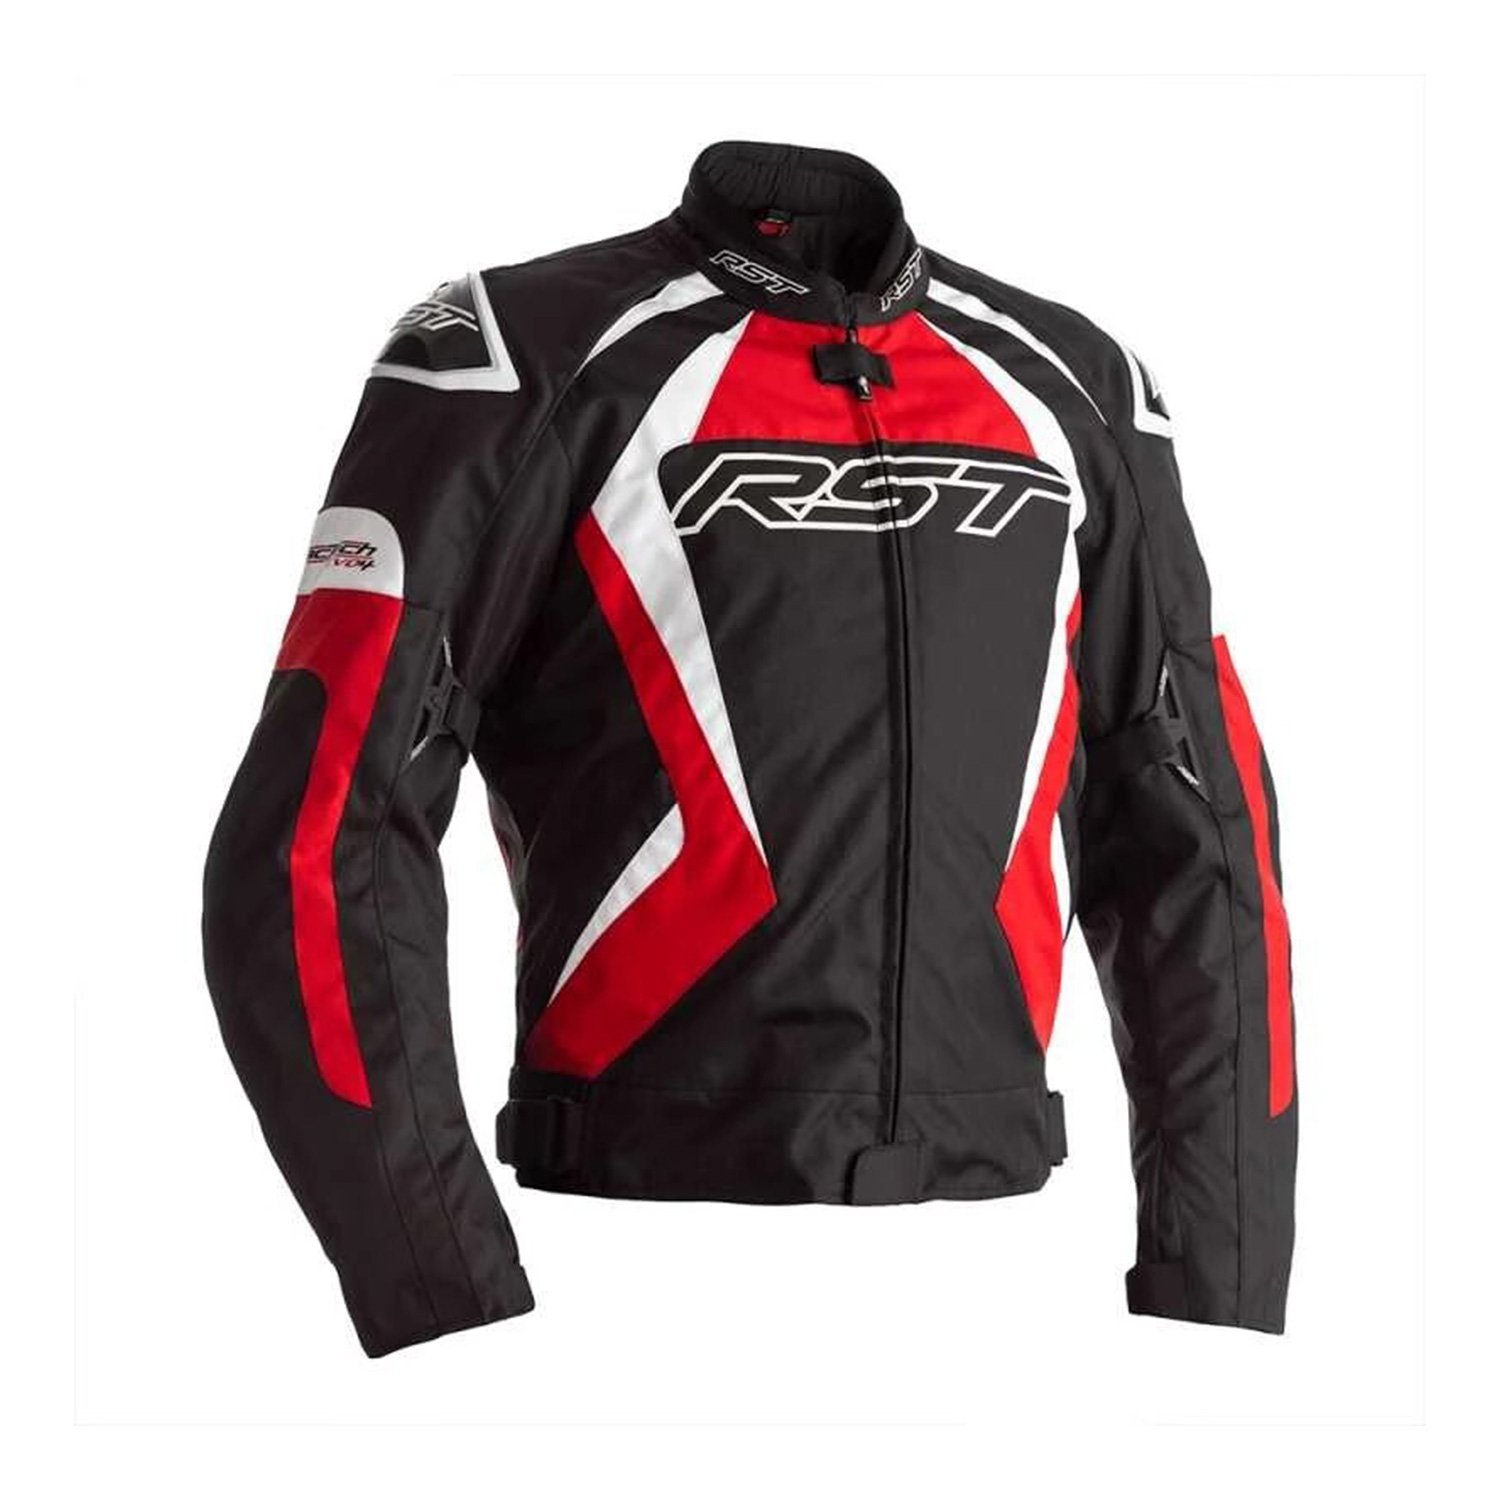 Image of RST Tractech Evo 4 CE Jacket Black Red White Talla 42